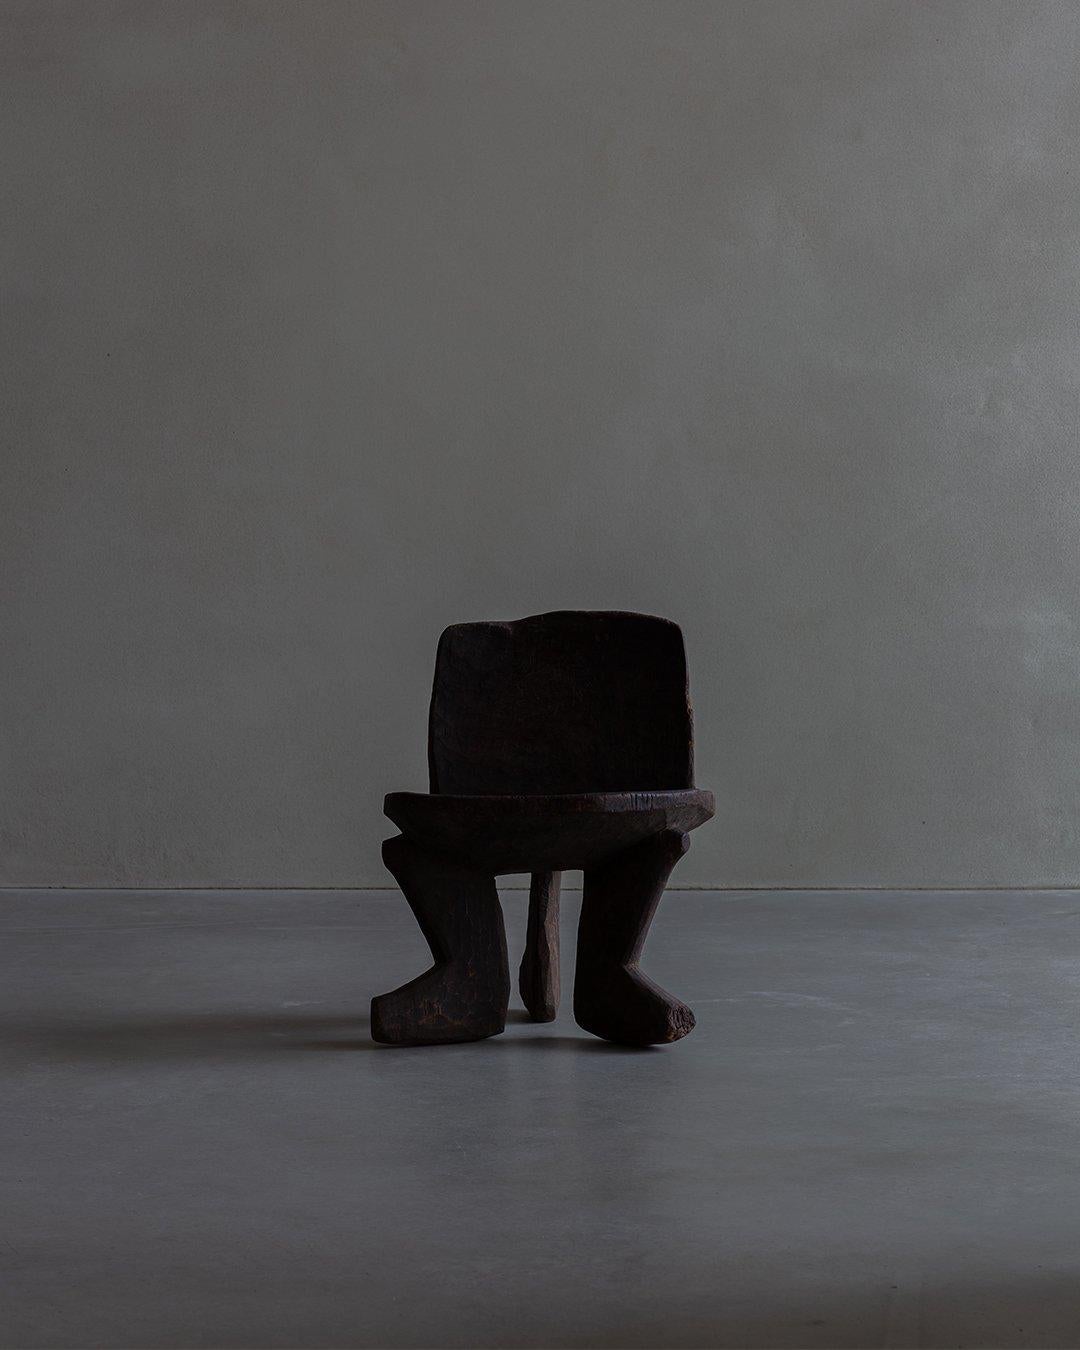 Crafted during the mid-20th century by African artisans using exclusively manual techniques, this stool showcases craftsmanship. The stool's surface has a rich patina, imparting a distinct character and authenticity. Its weathered appearance serves